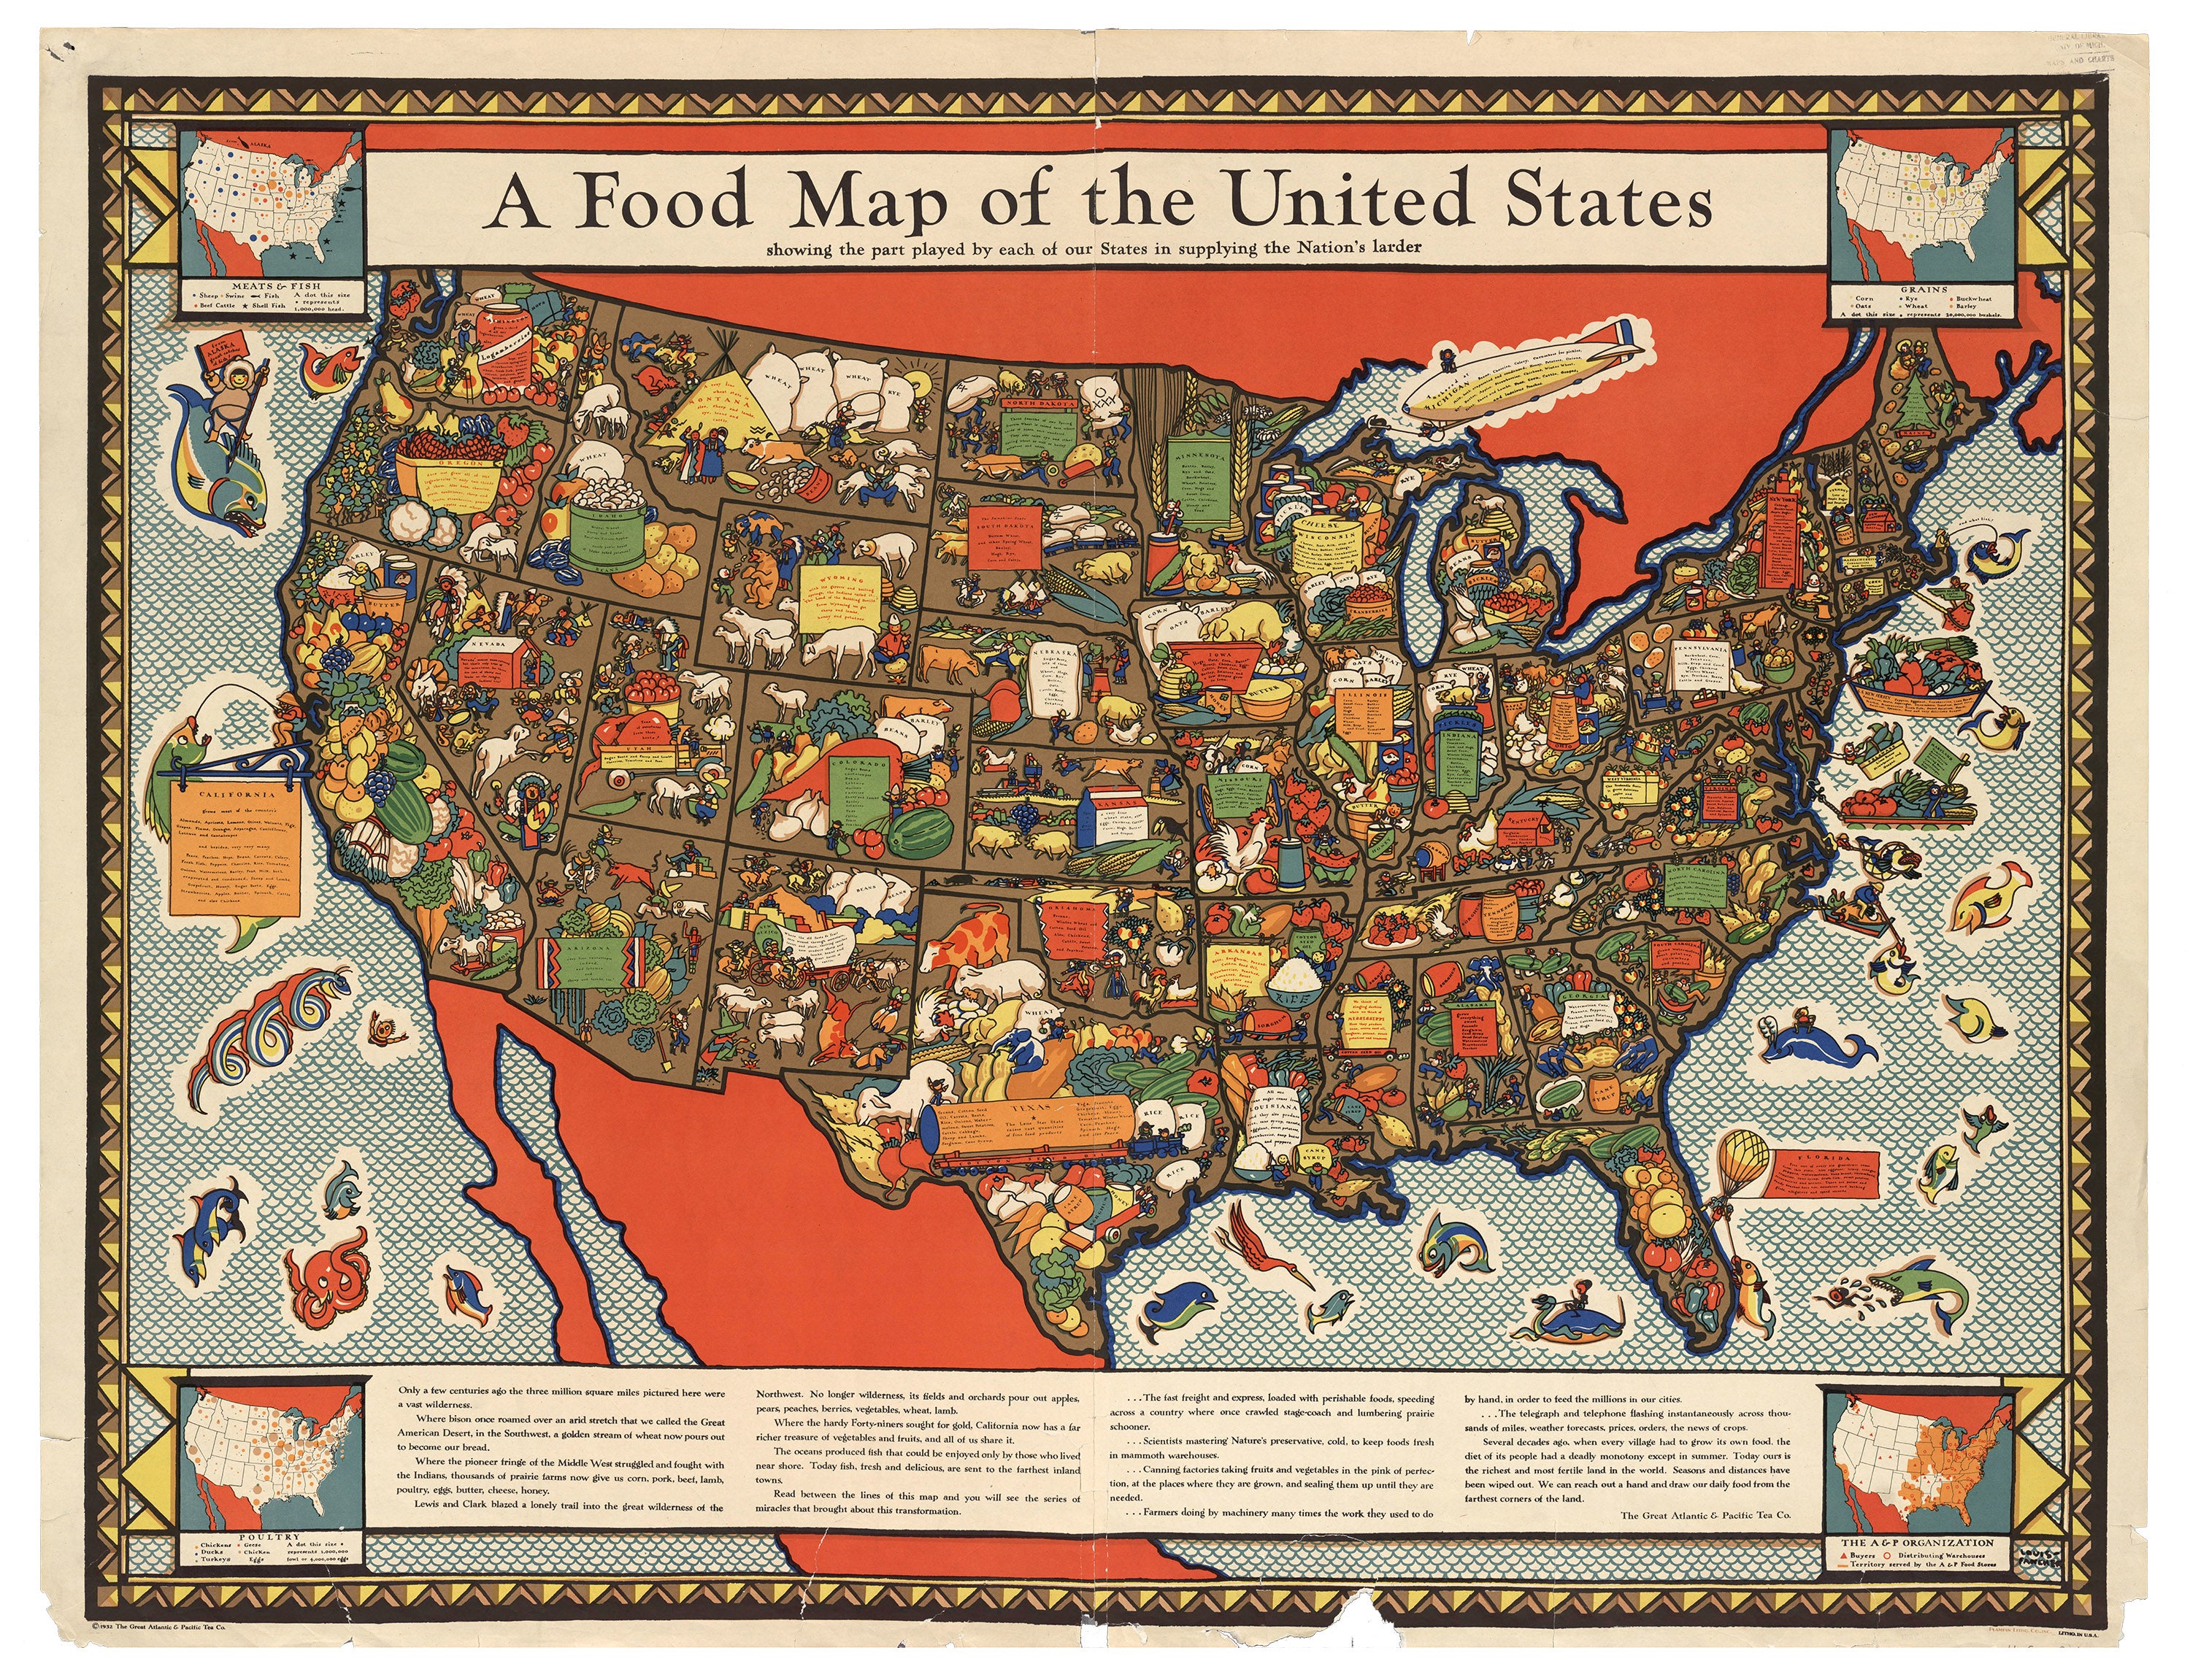 Pictorial Food Map of the United States